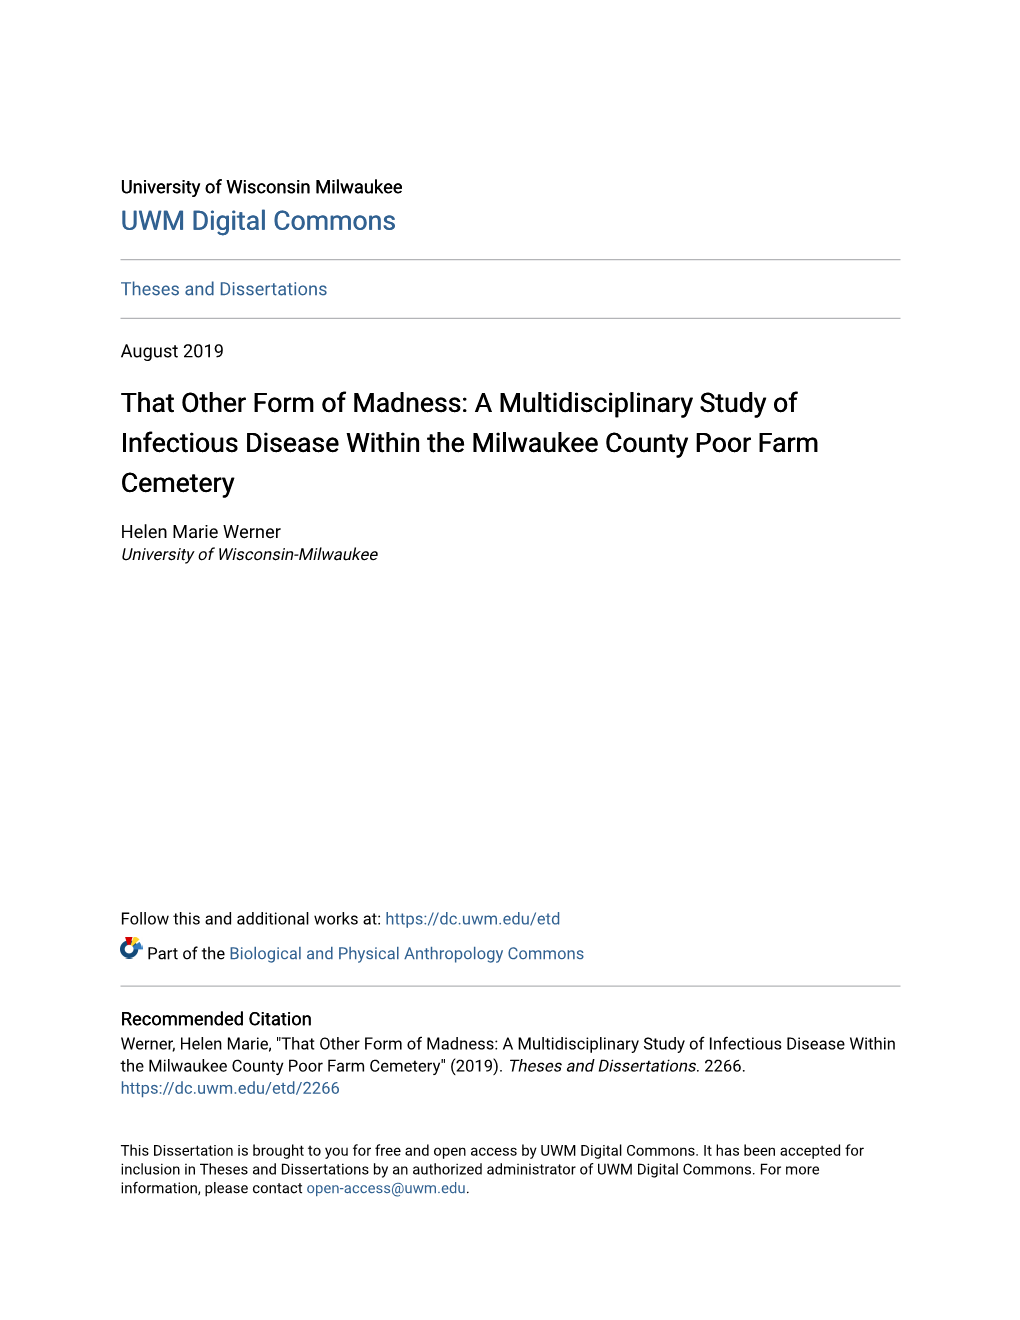 That Other Form of Madness: a Multidisciplinary Study of Infectious Disease Within the Milwaukee County Poor Farm Cemetery